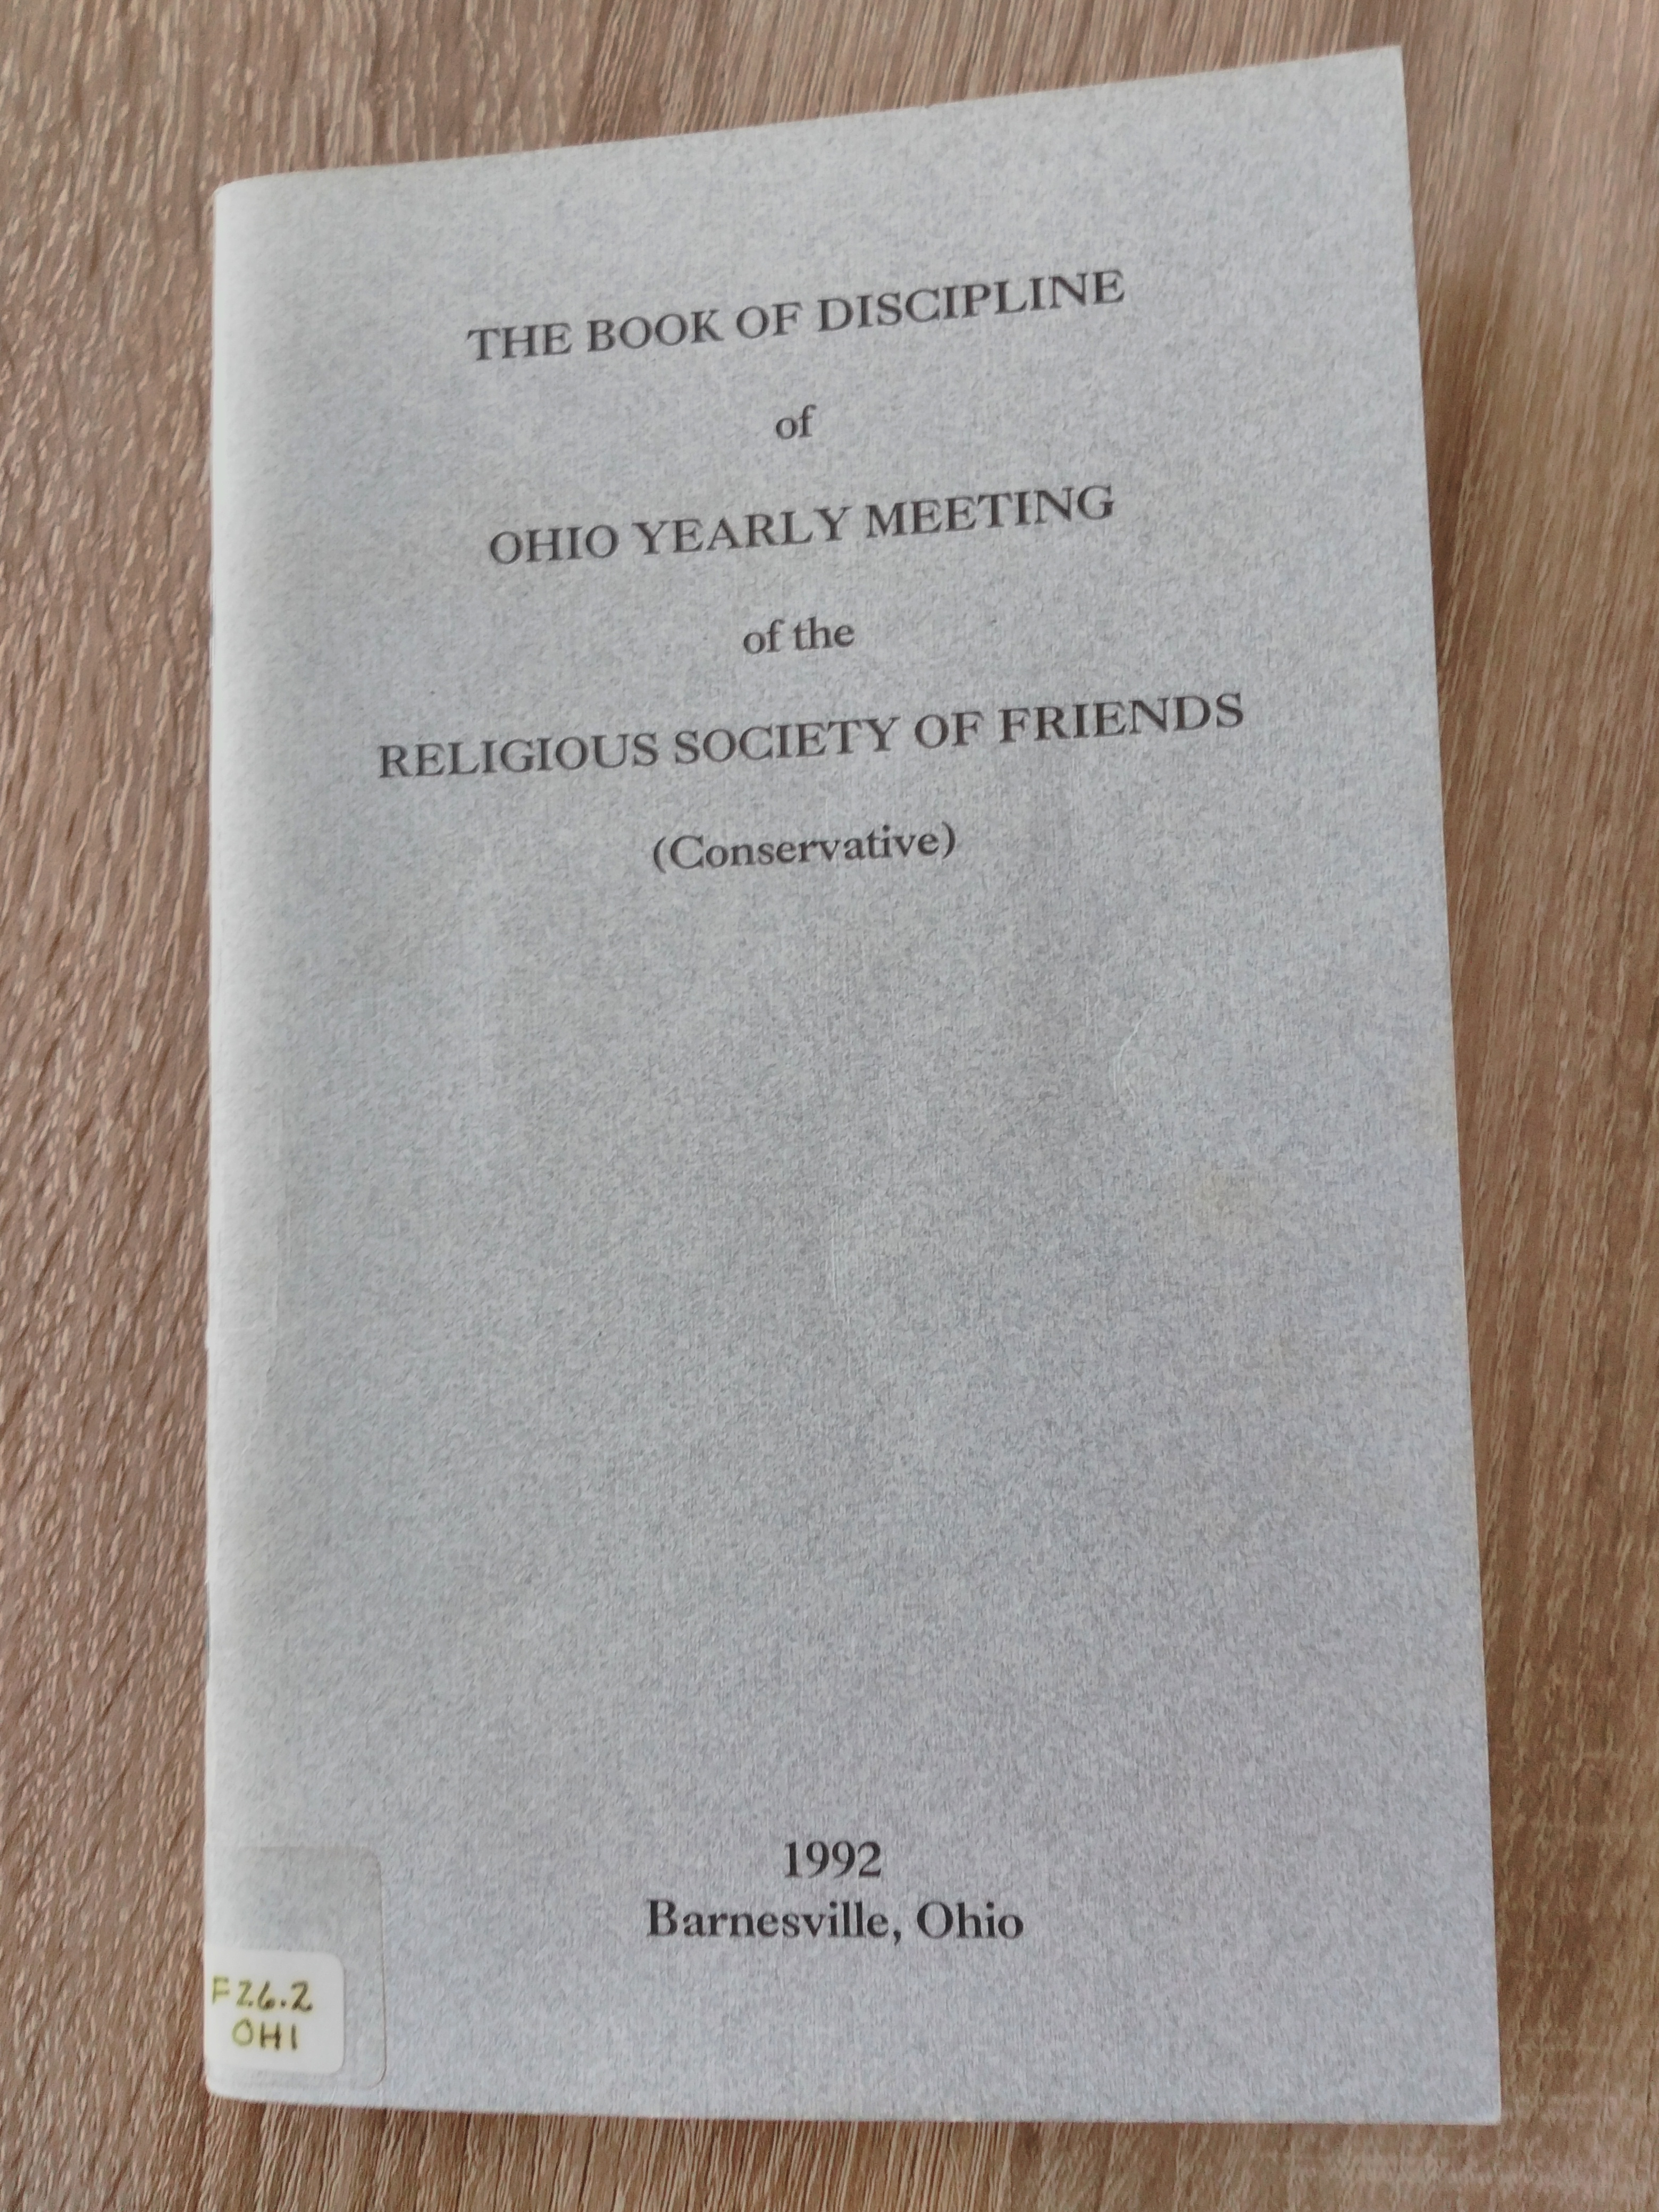 a plain grey book cover with black text which reads "The book of discipline of Ohio Yearly Meeting of the Religious Society of Friends (Conservative), 1992 Barnesville Ohio".